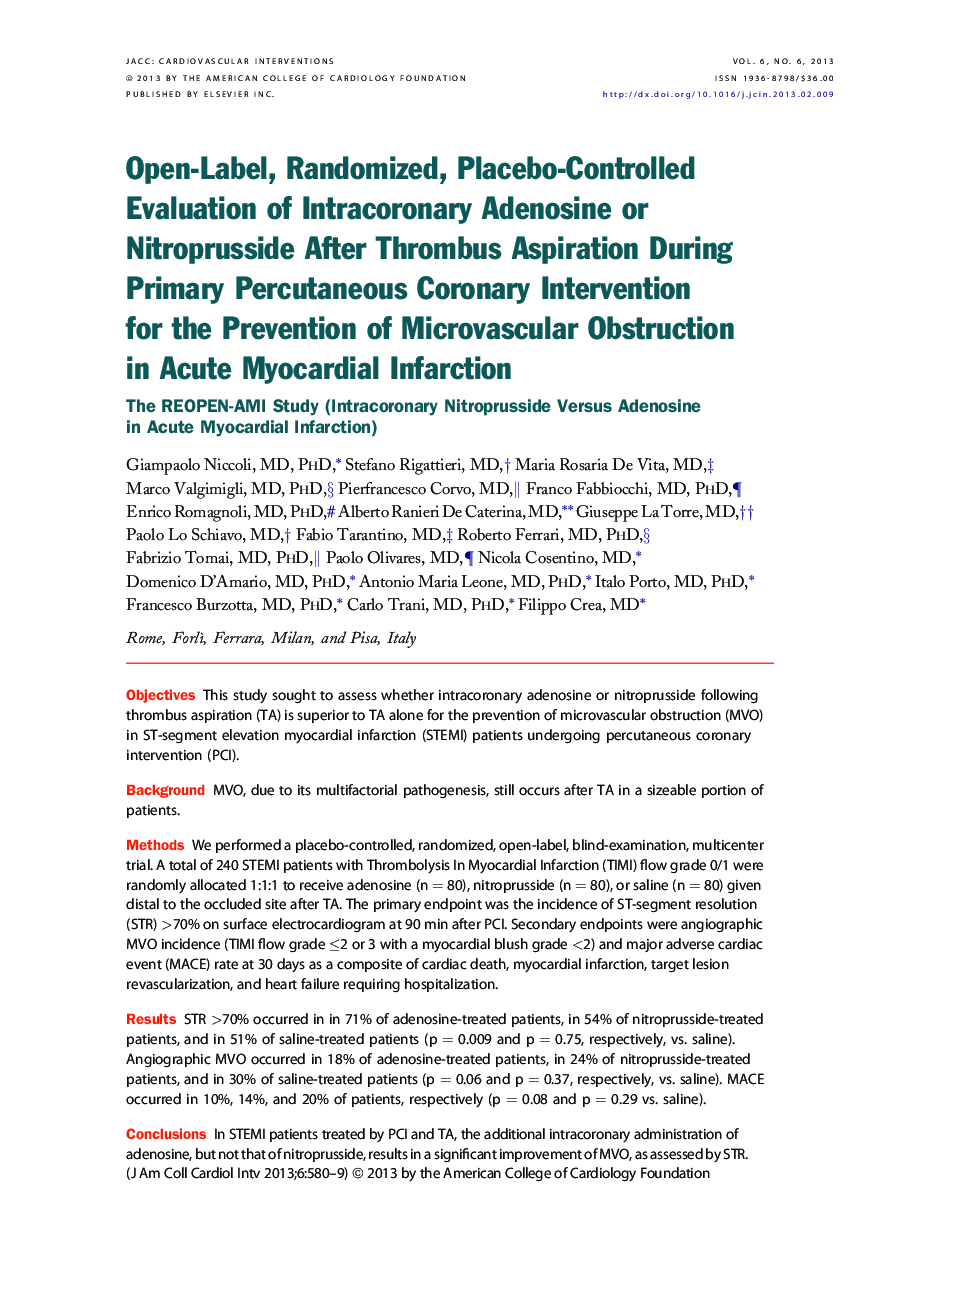 Open-Label, Randomized, Placebo-Controlled Evaluation of Intracoronary Adenosine or Nitroprusside After Thrombus Aspiration During Primary Percutaneous Coronary Intervention for the Prevention of Microvascular Obstruction in Acute Myocardial Infarction : 